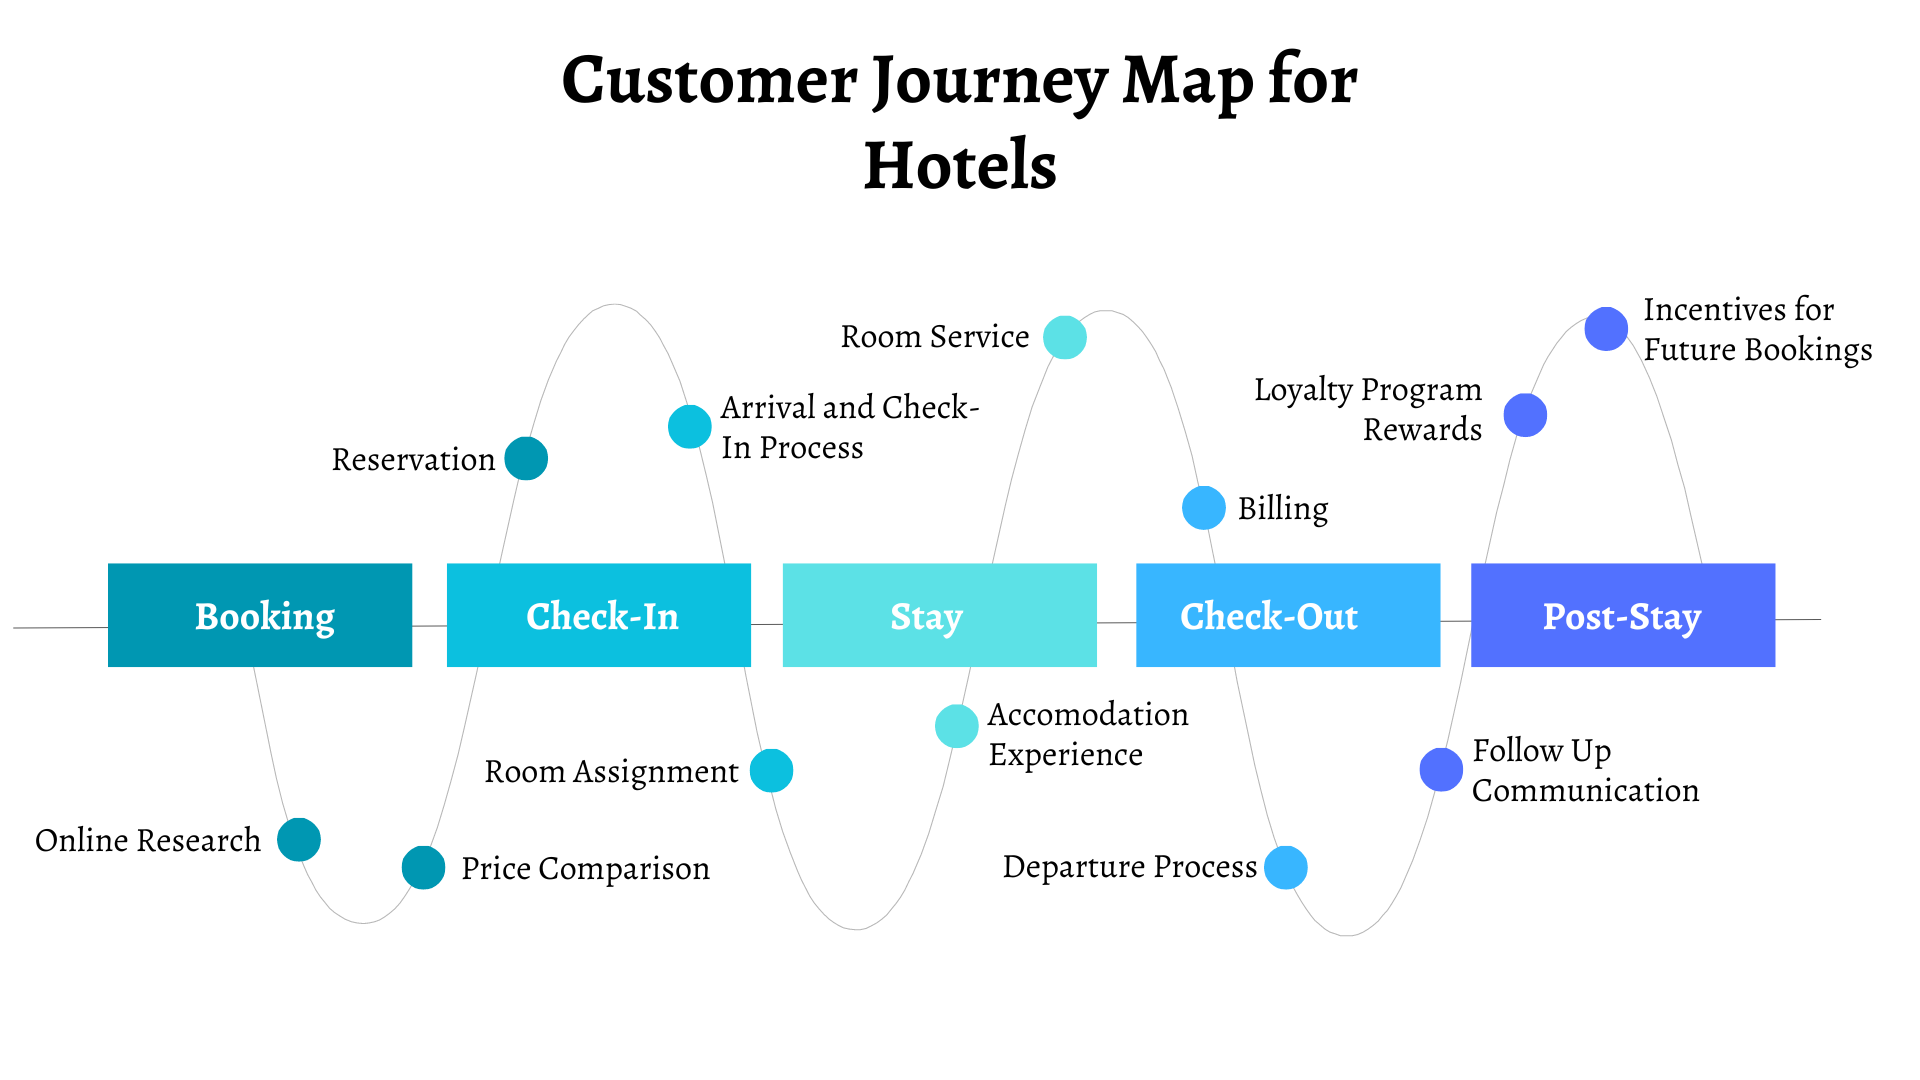 Customer Journey Map for Hotels